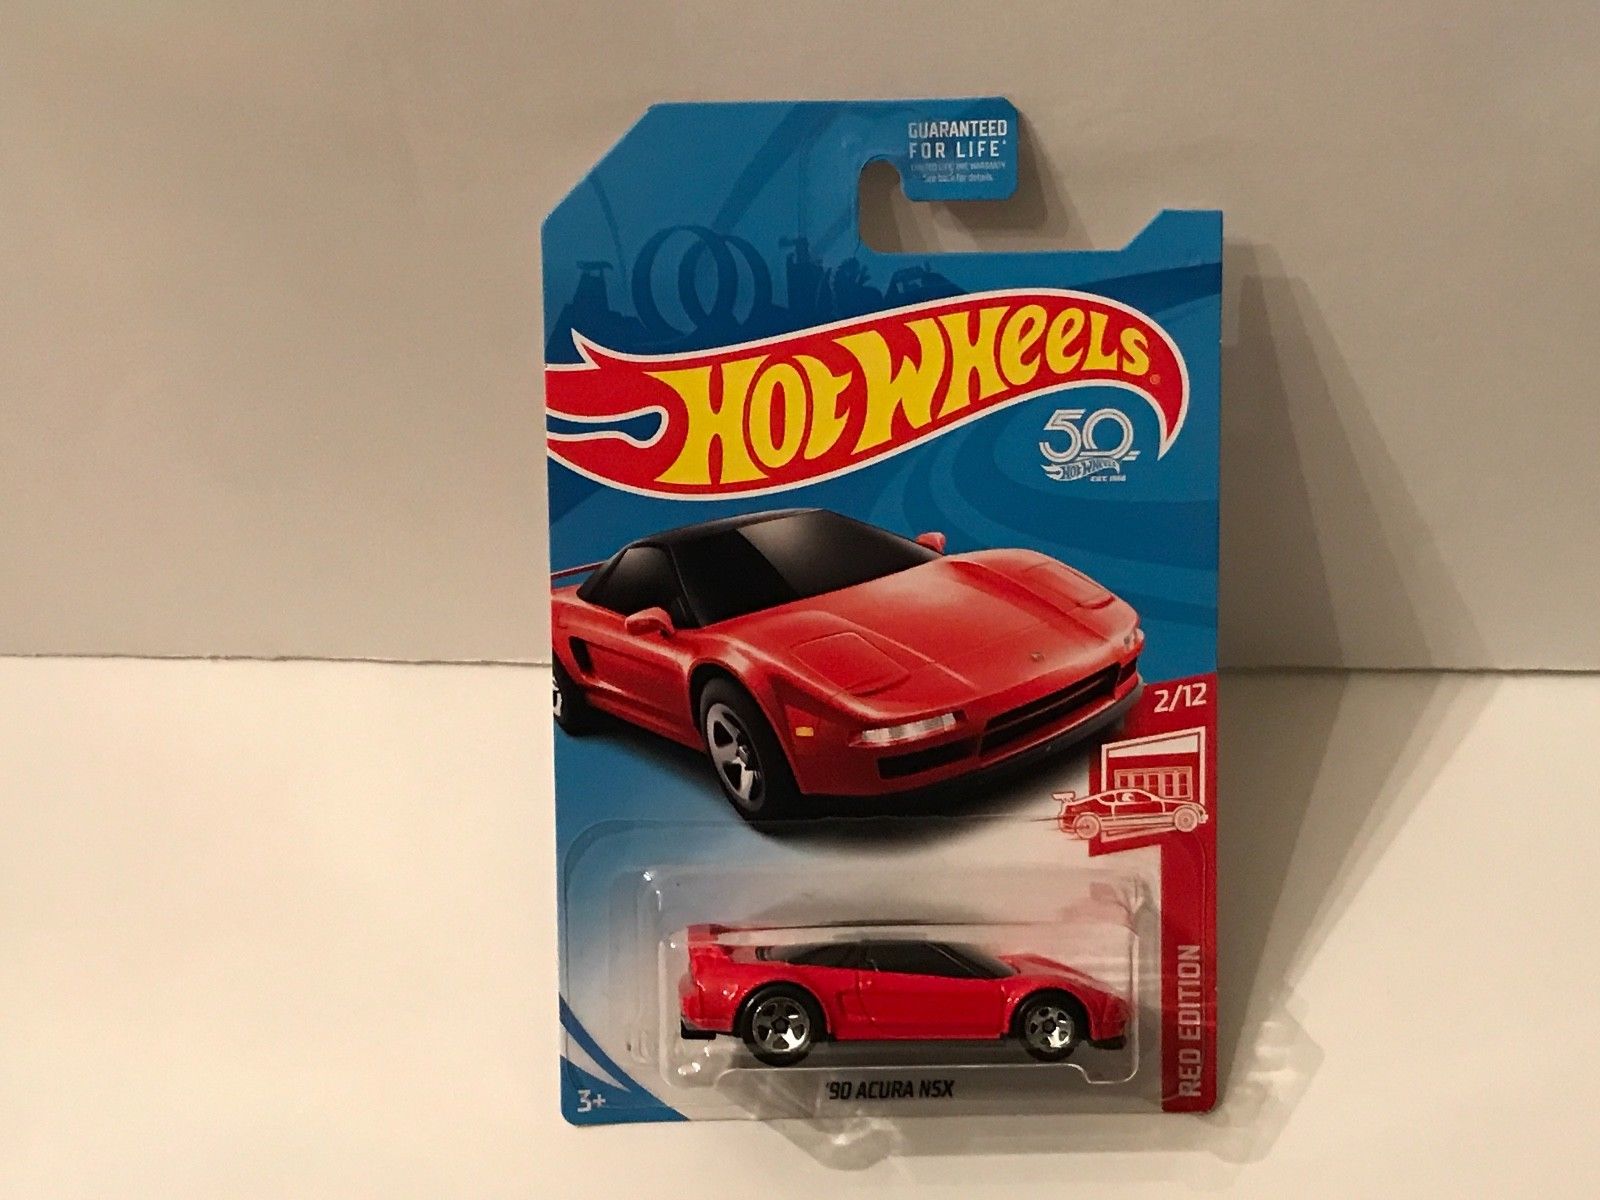 2019 target red edition hot wheels